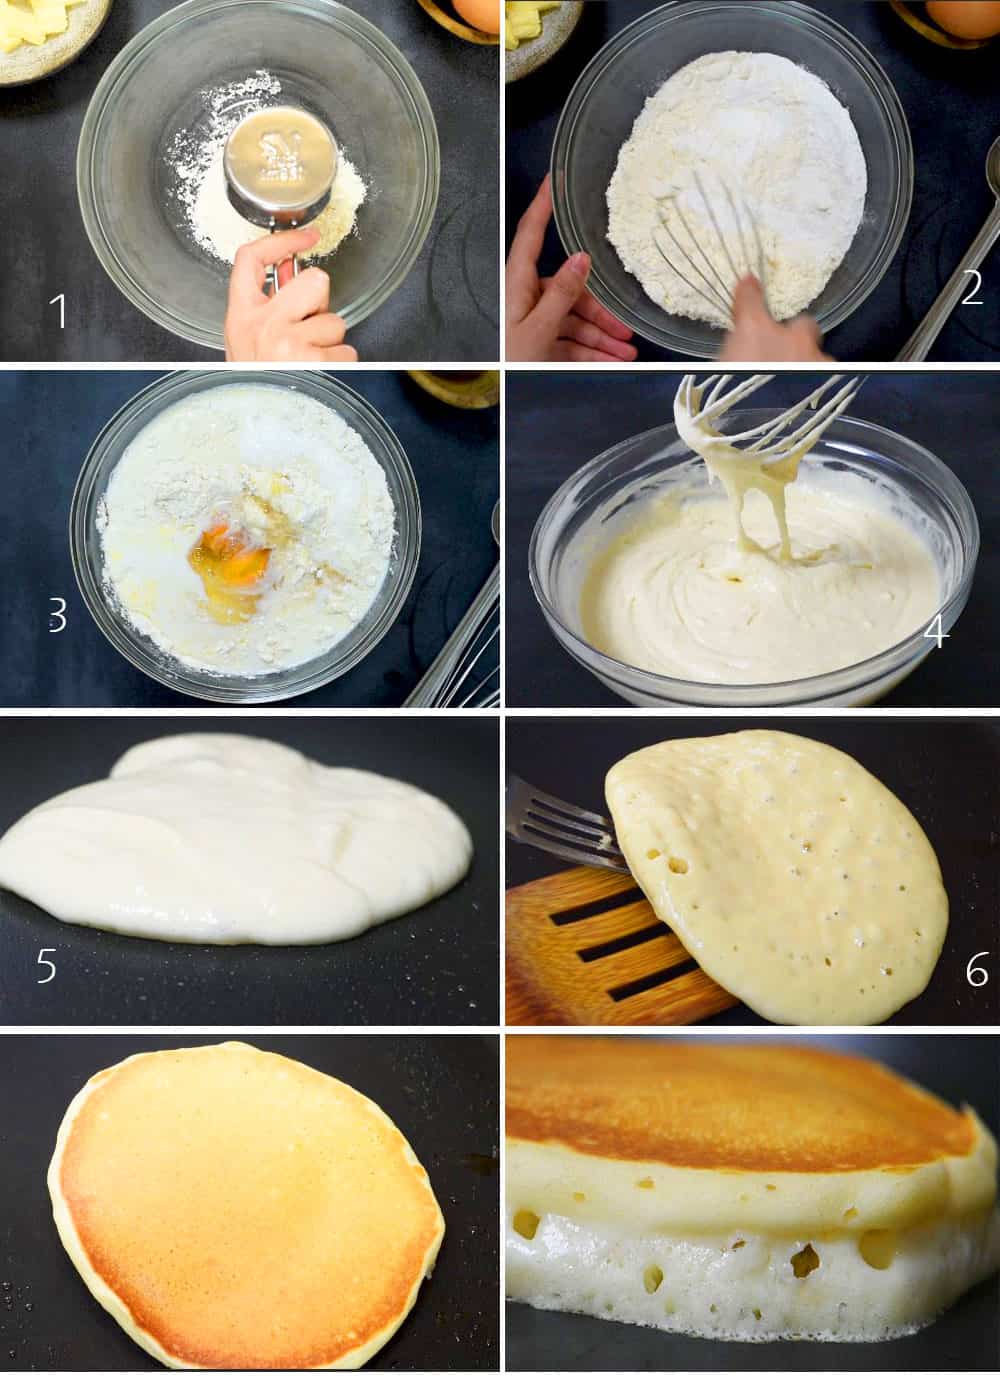 how-to-make-fluffy-pancakes